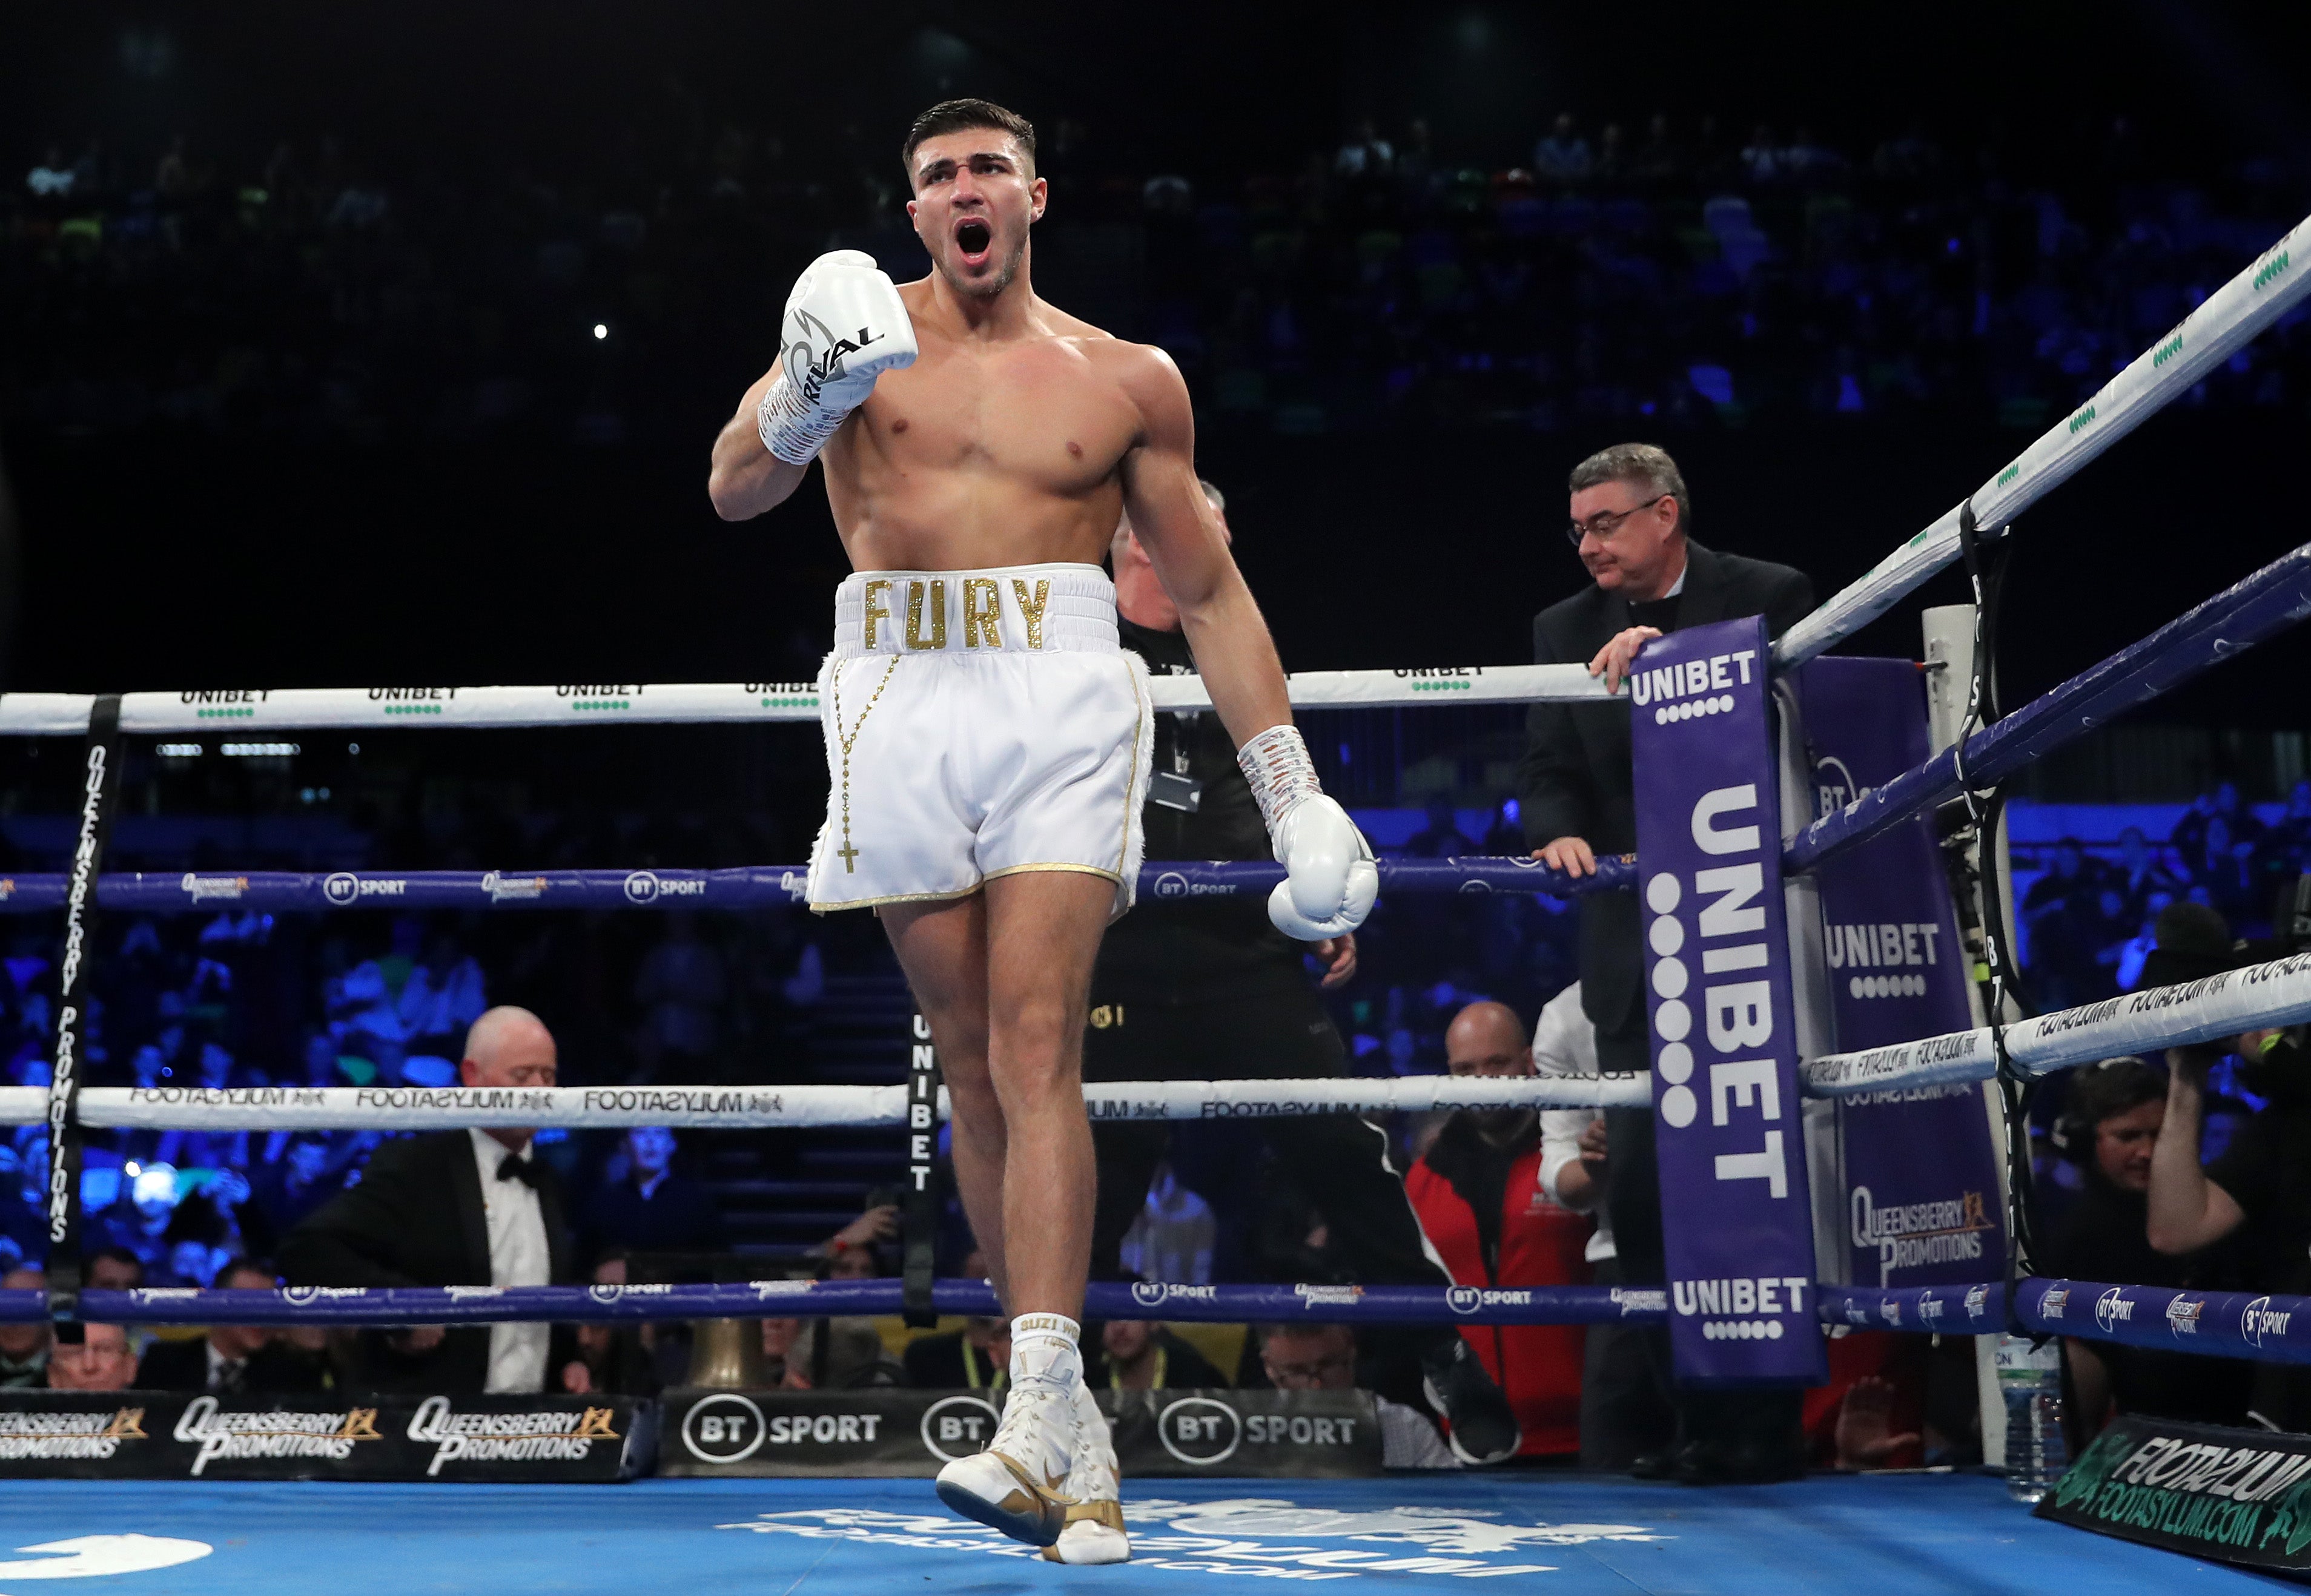 Tommy Fury has a 5-0 boxing record